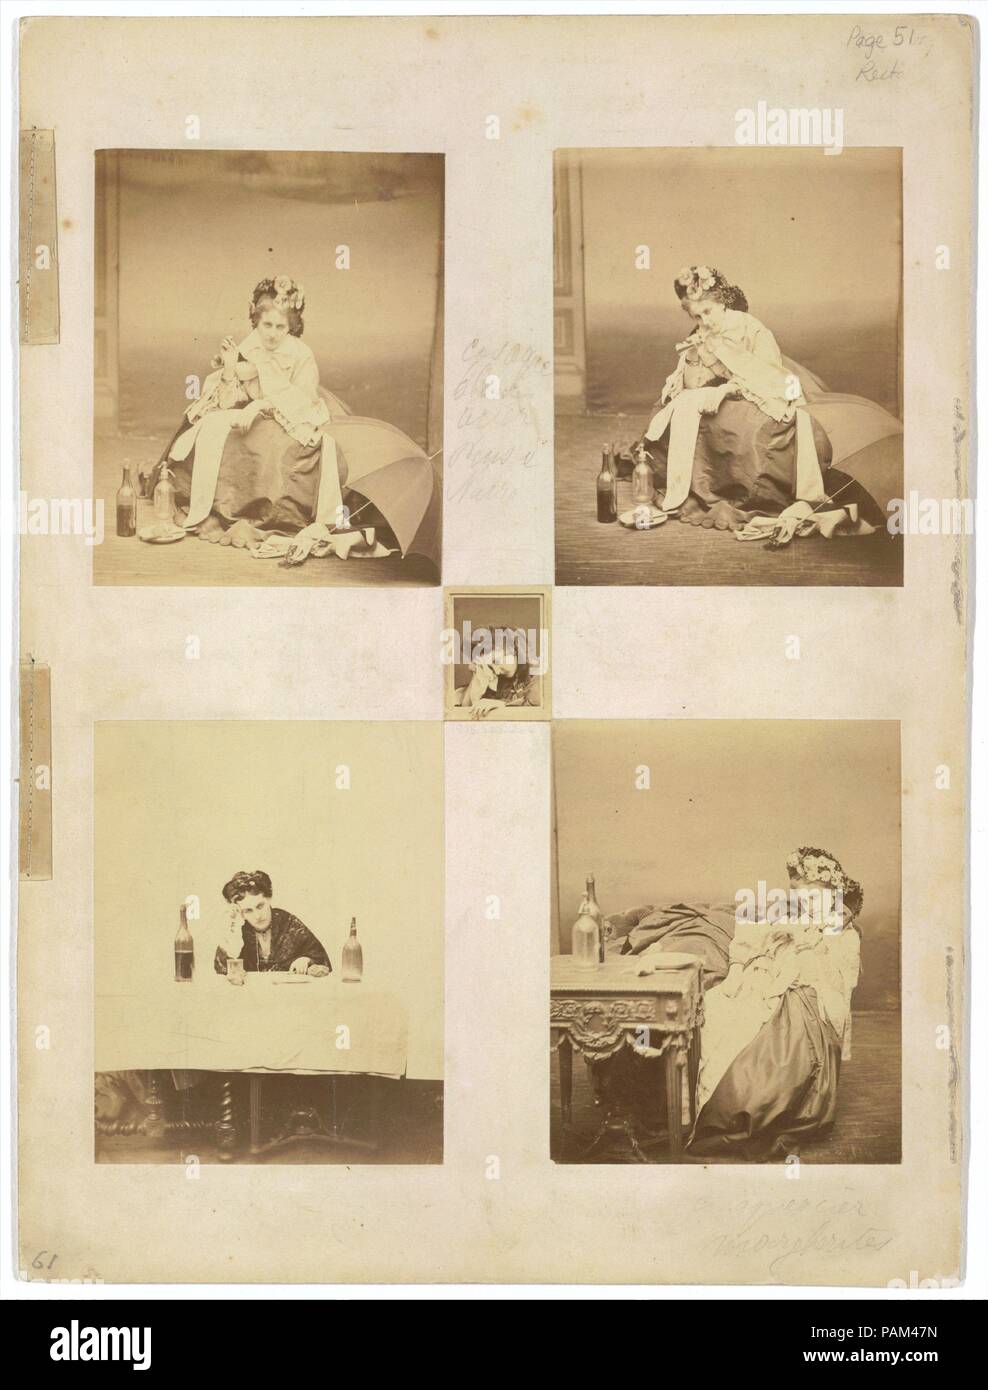 [Album page with ten photographs of La Comtesse mounted recto and verso]. Artist: Pierre-Louis Pierson (French, 1822-1913). Dimensions: 10.8 x 8.6 cm (4 1/4 x 3 3/8 in.) to 2.5 x 3.5 cm (1 x 1 3/8 in.). Person in Photograph: Countess Virginia Oldoini Verasis di Castiglione (1835-1899). Date: 1861-67. Museum: Metropolitan Museum of Art, New York, USA. Stock Photo